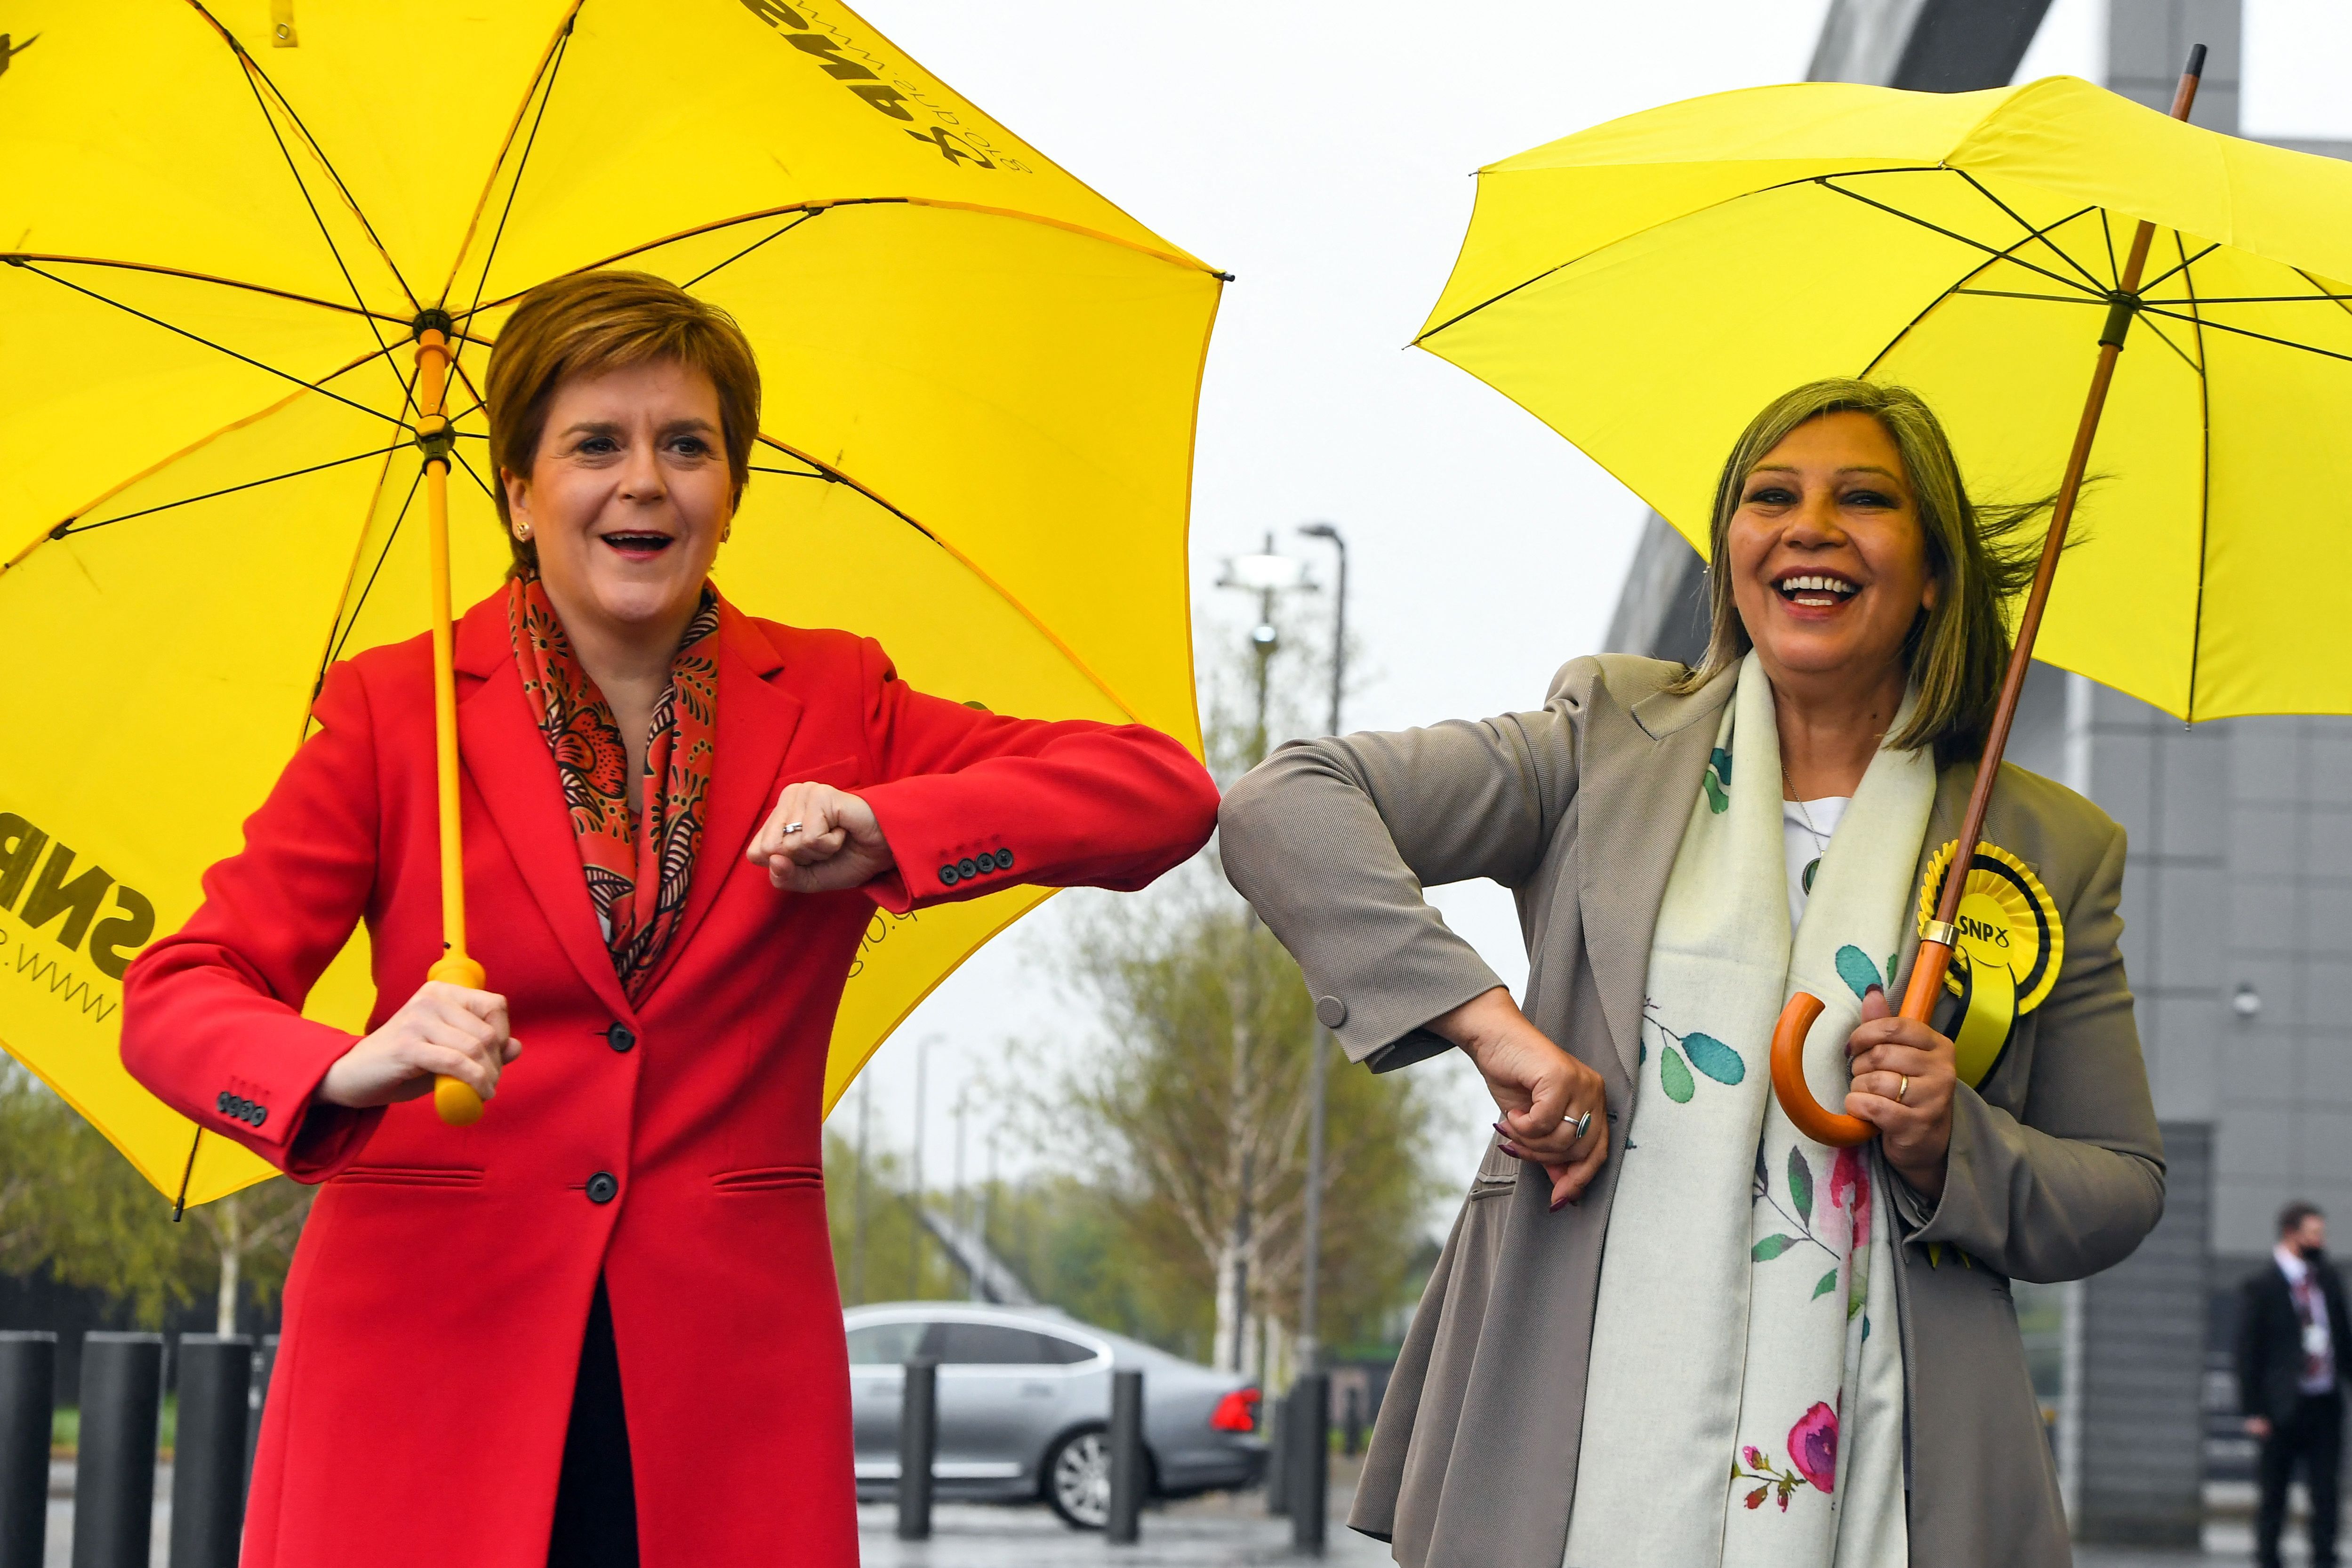 Scotland's First Minister and leader of the Scottish National Party (SNP), Nicola Sturgeon (L) congratulates SNP candidate Kaukab Stewart after she was elected MSP for Glasgow Kelvin in the Scottish Parliamentary Election, in Glasgow.